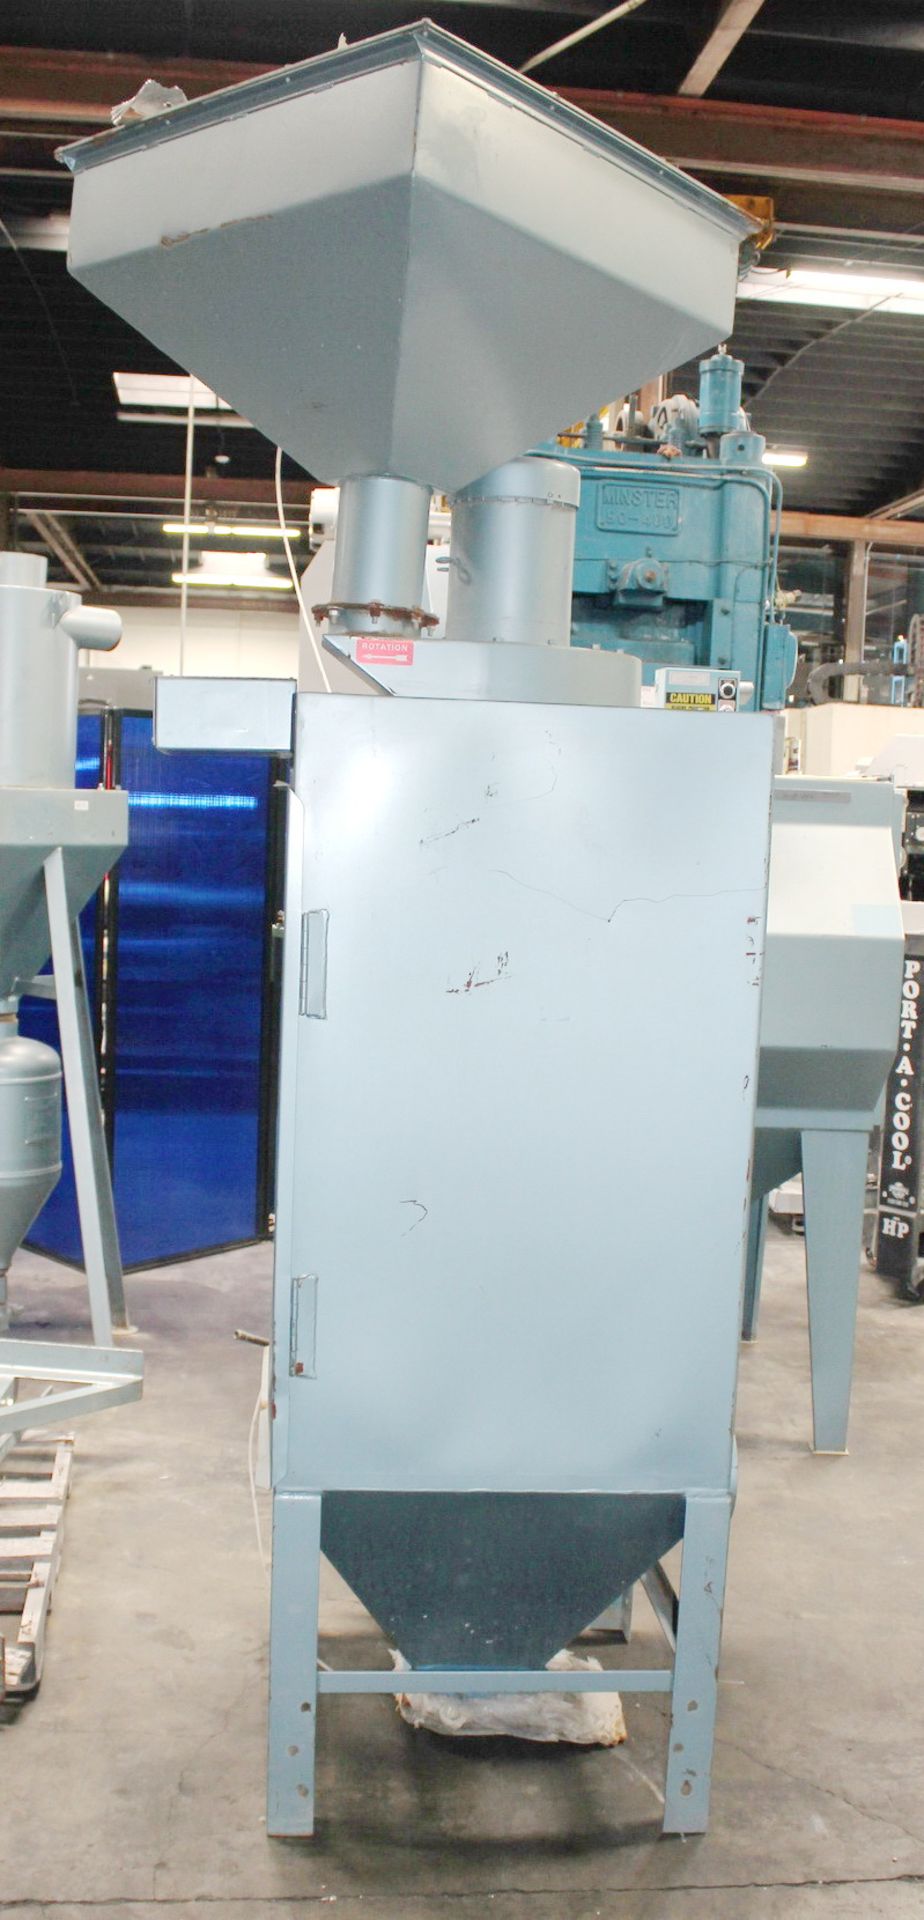 Universal Suction Type Blast Cabinet & Dust Collector | 60" x 48" x 36", Mdl: 60x48x36PDH-DC200, S/ - Image 14 of 20